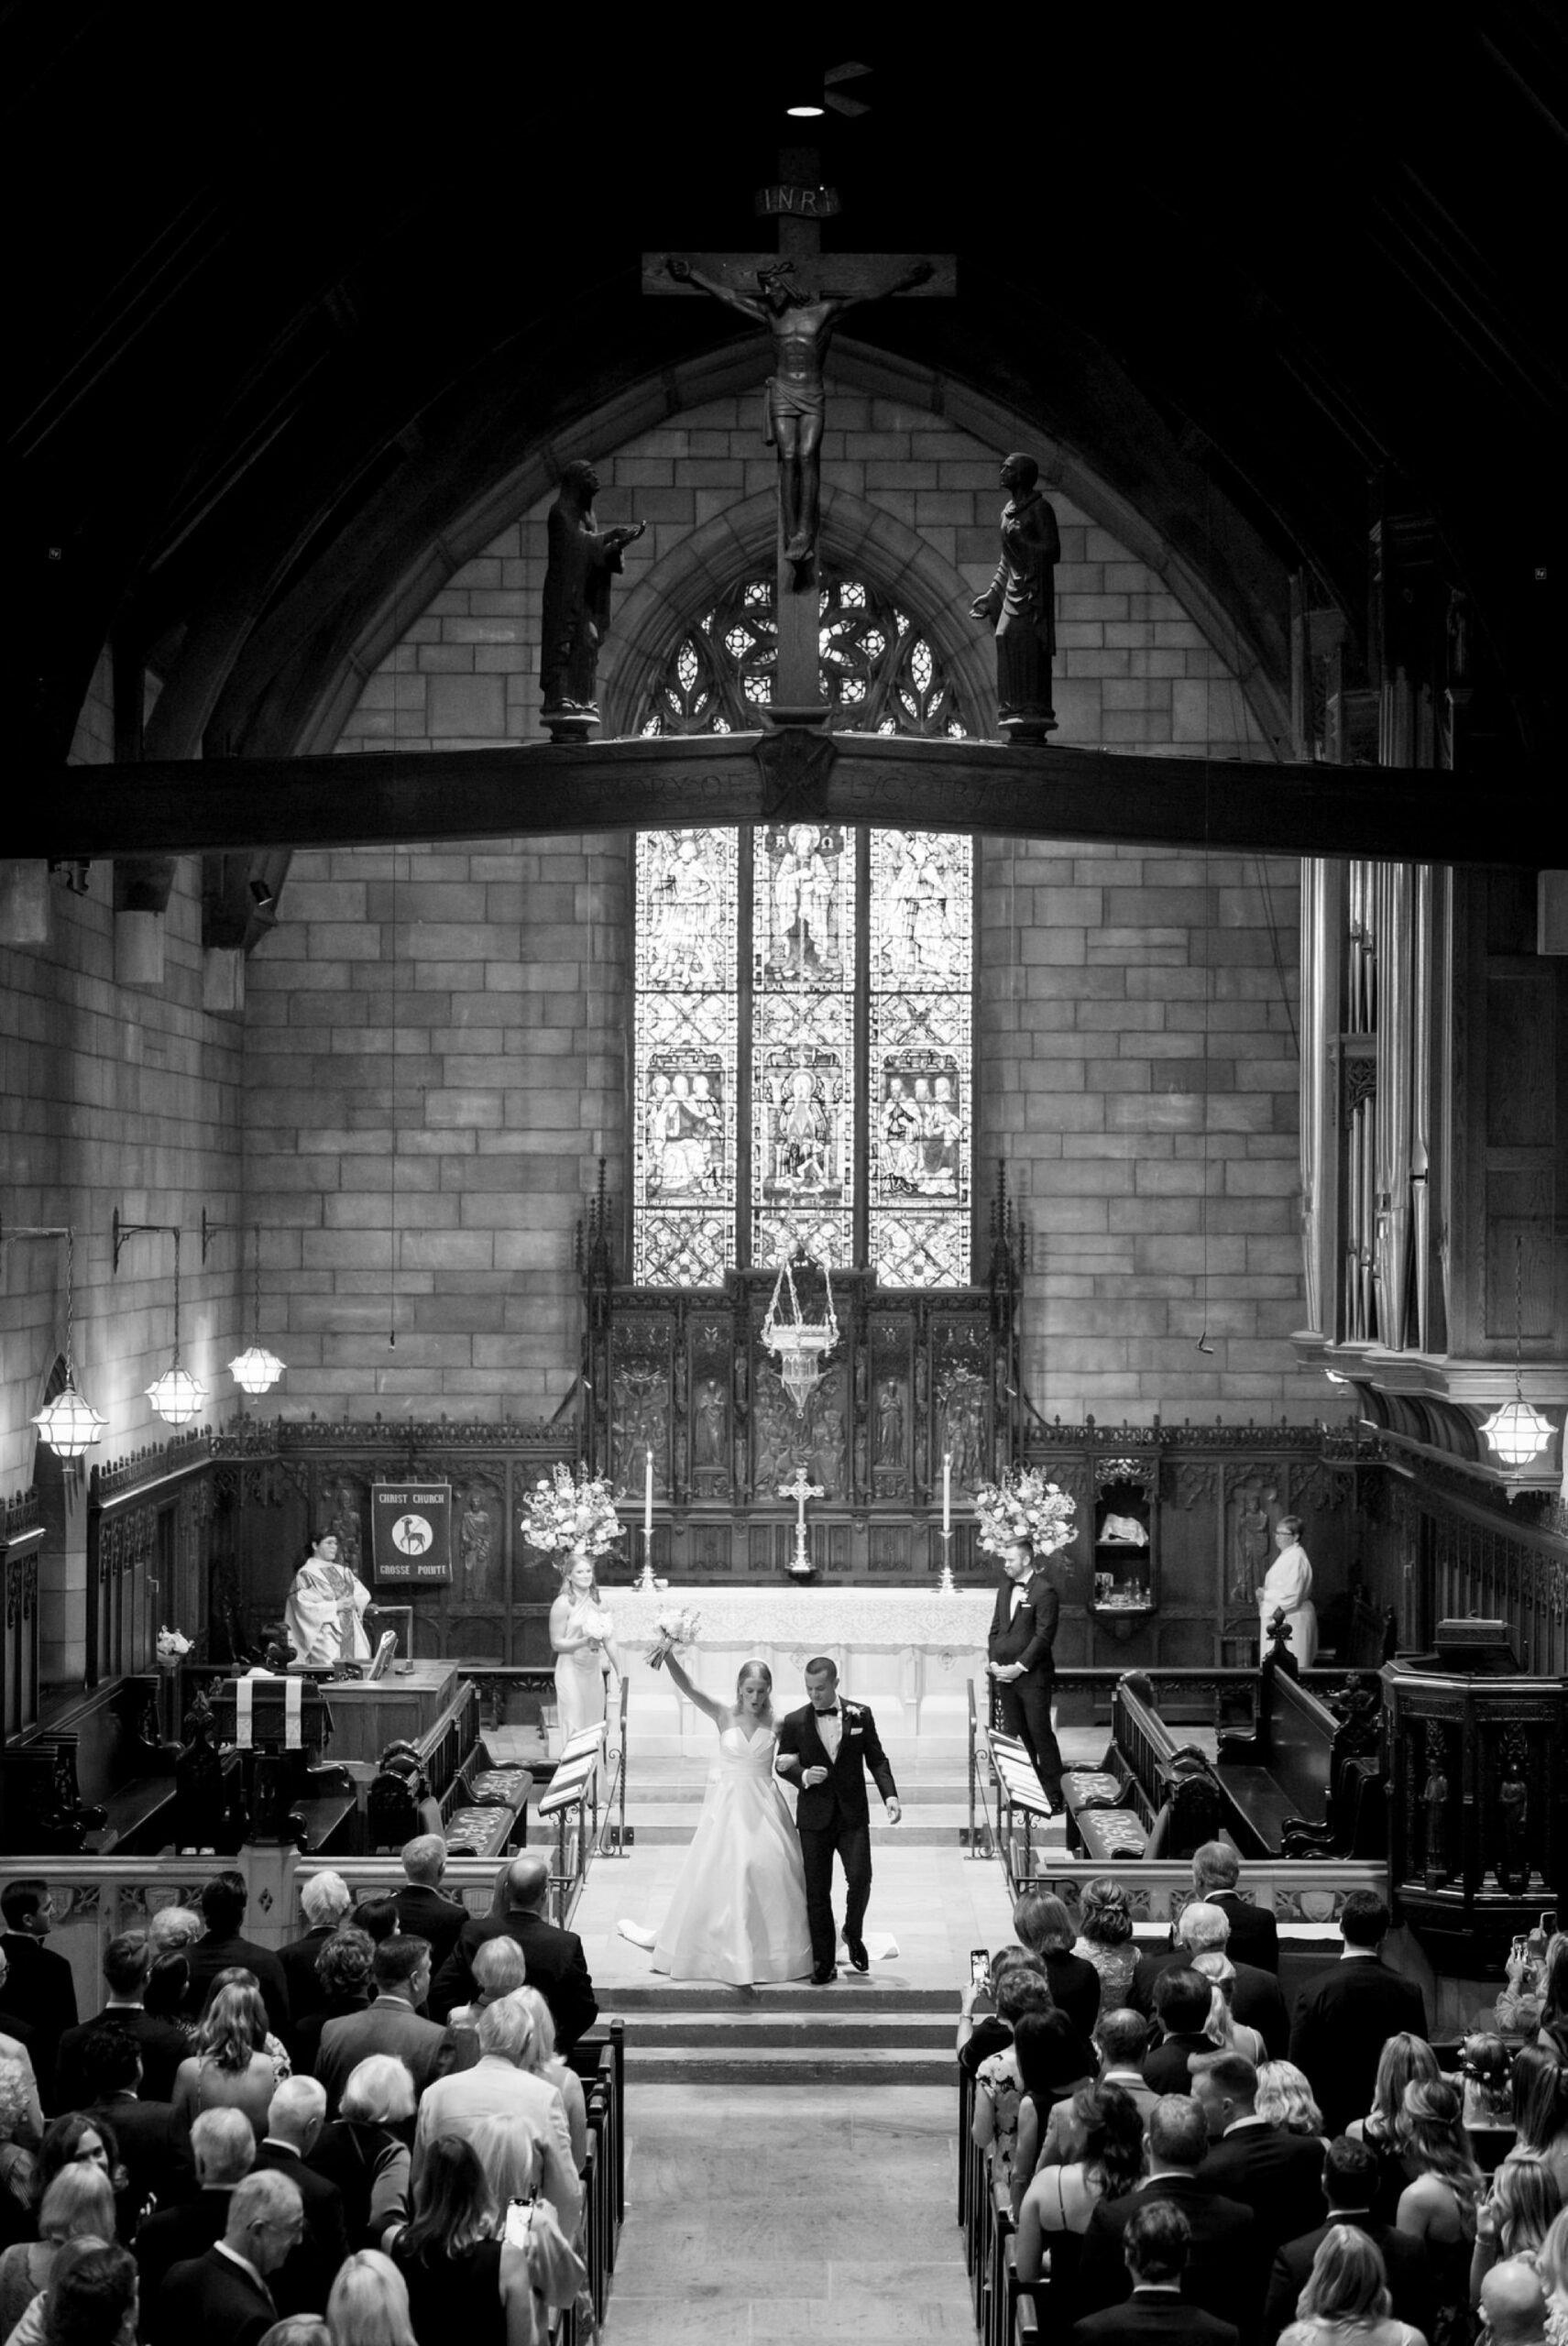 The bride and groom smile, walking down the aisle after their wedding at Christ Church Grosse Pointe.